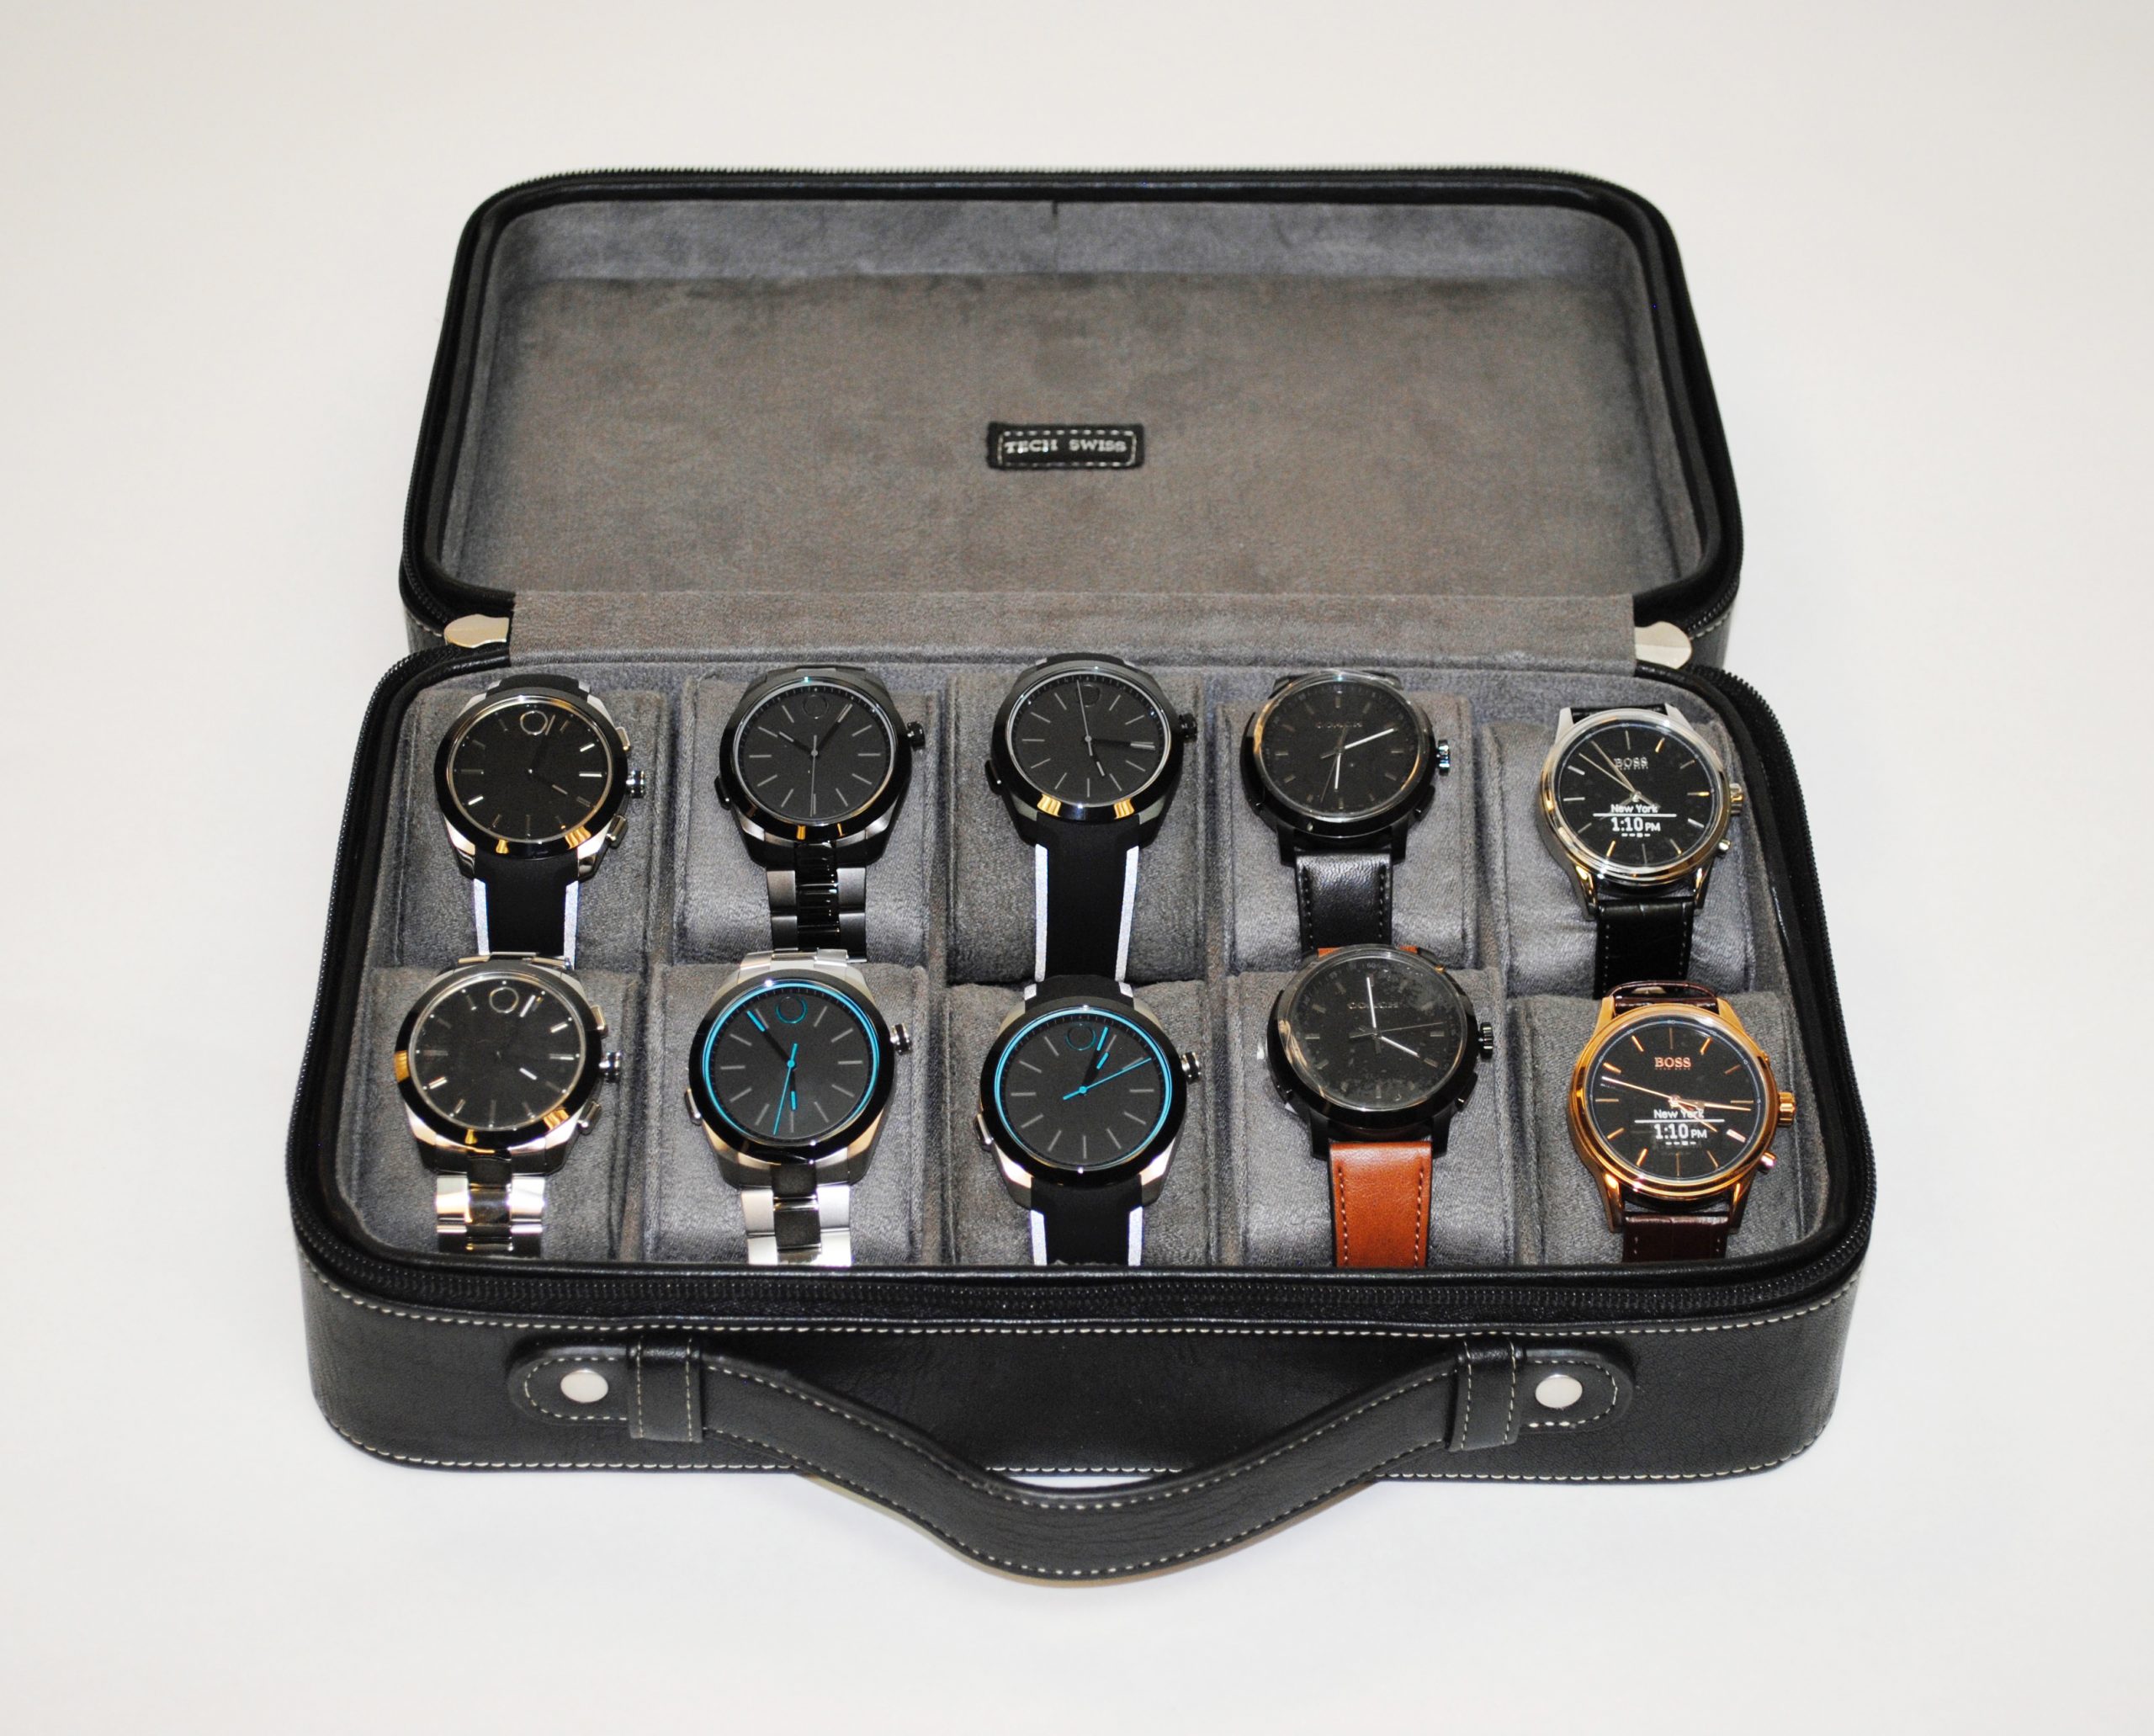 A carrying case with 10 smartwatches engineered by HP.